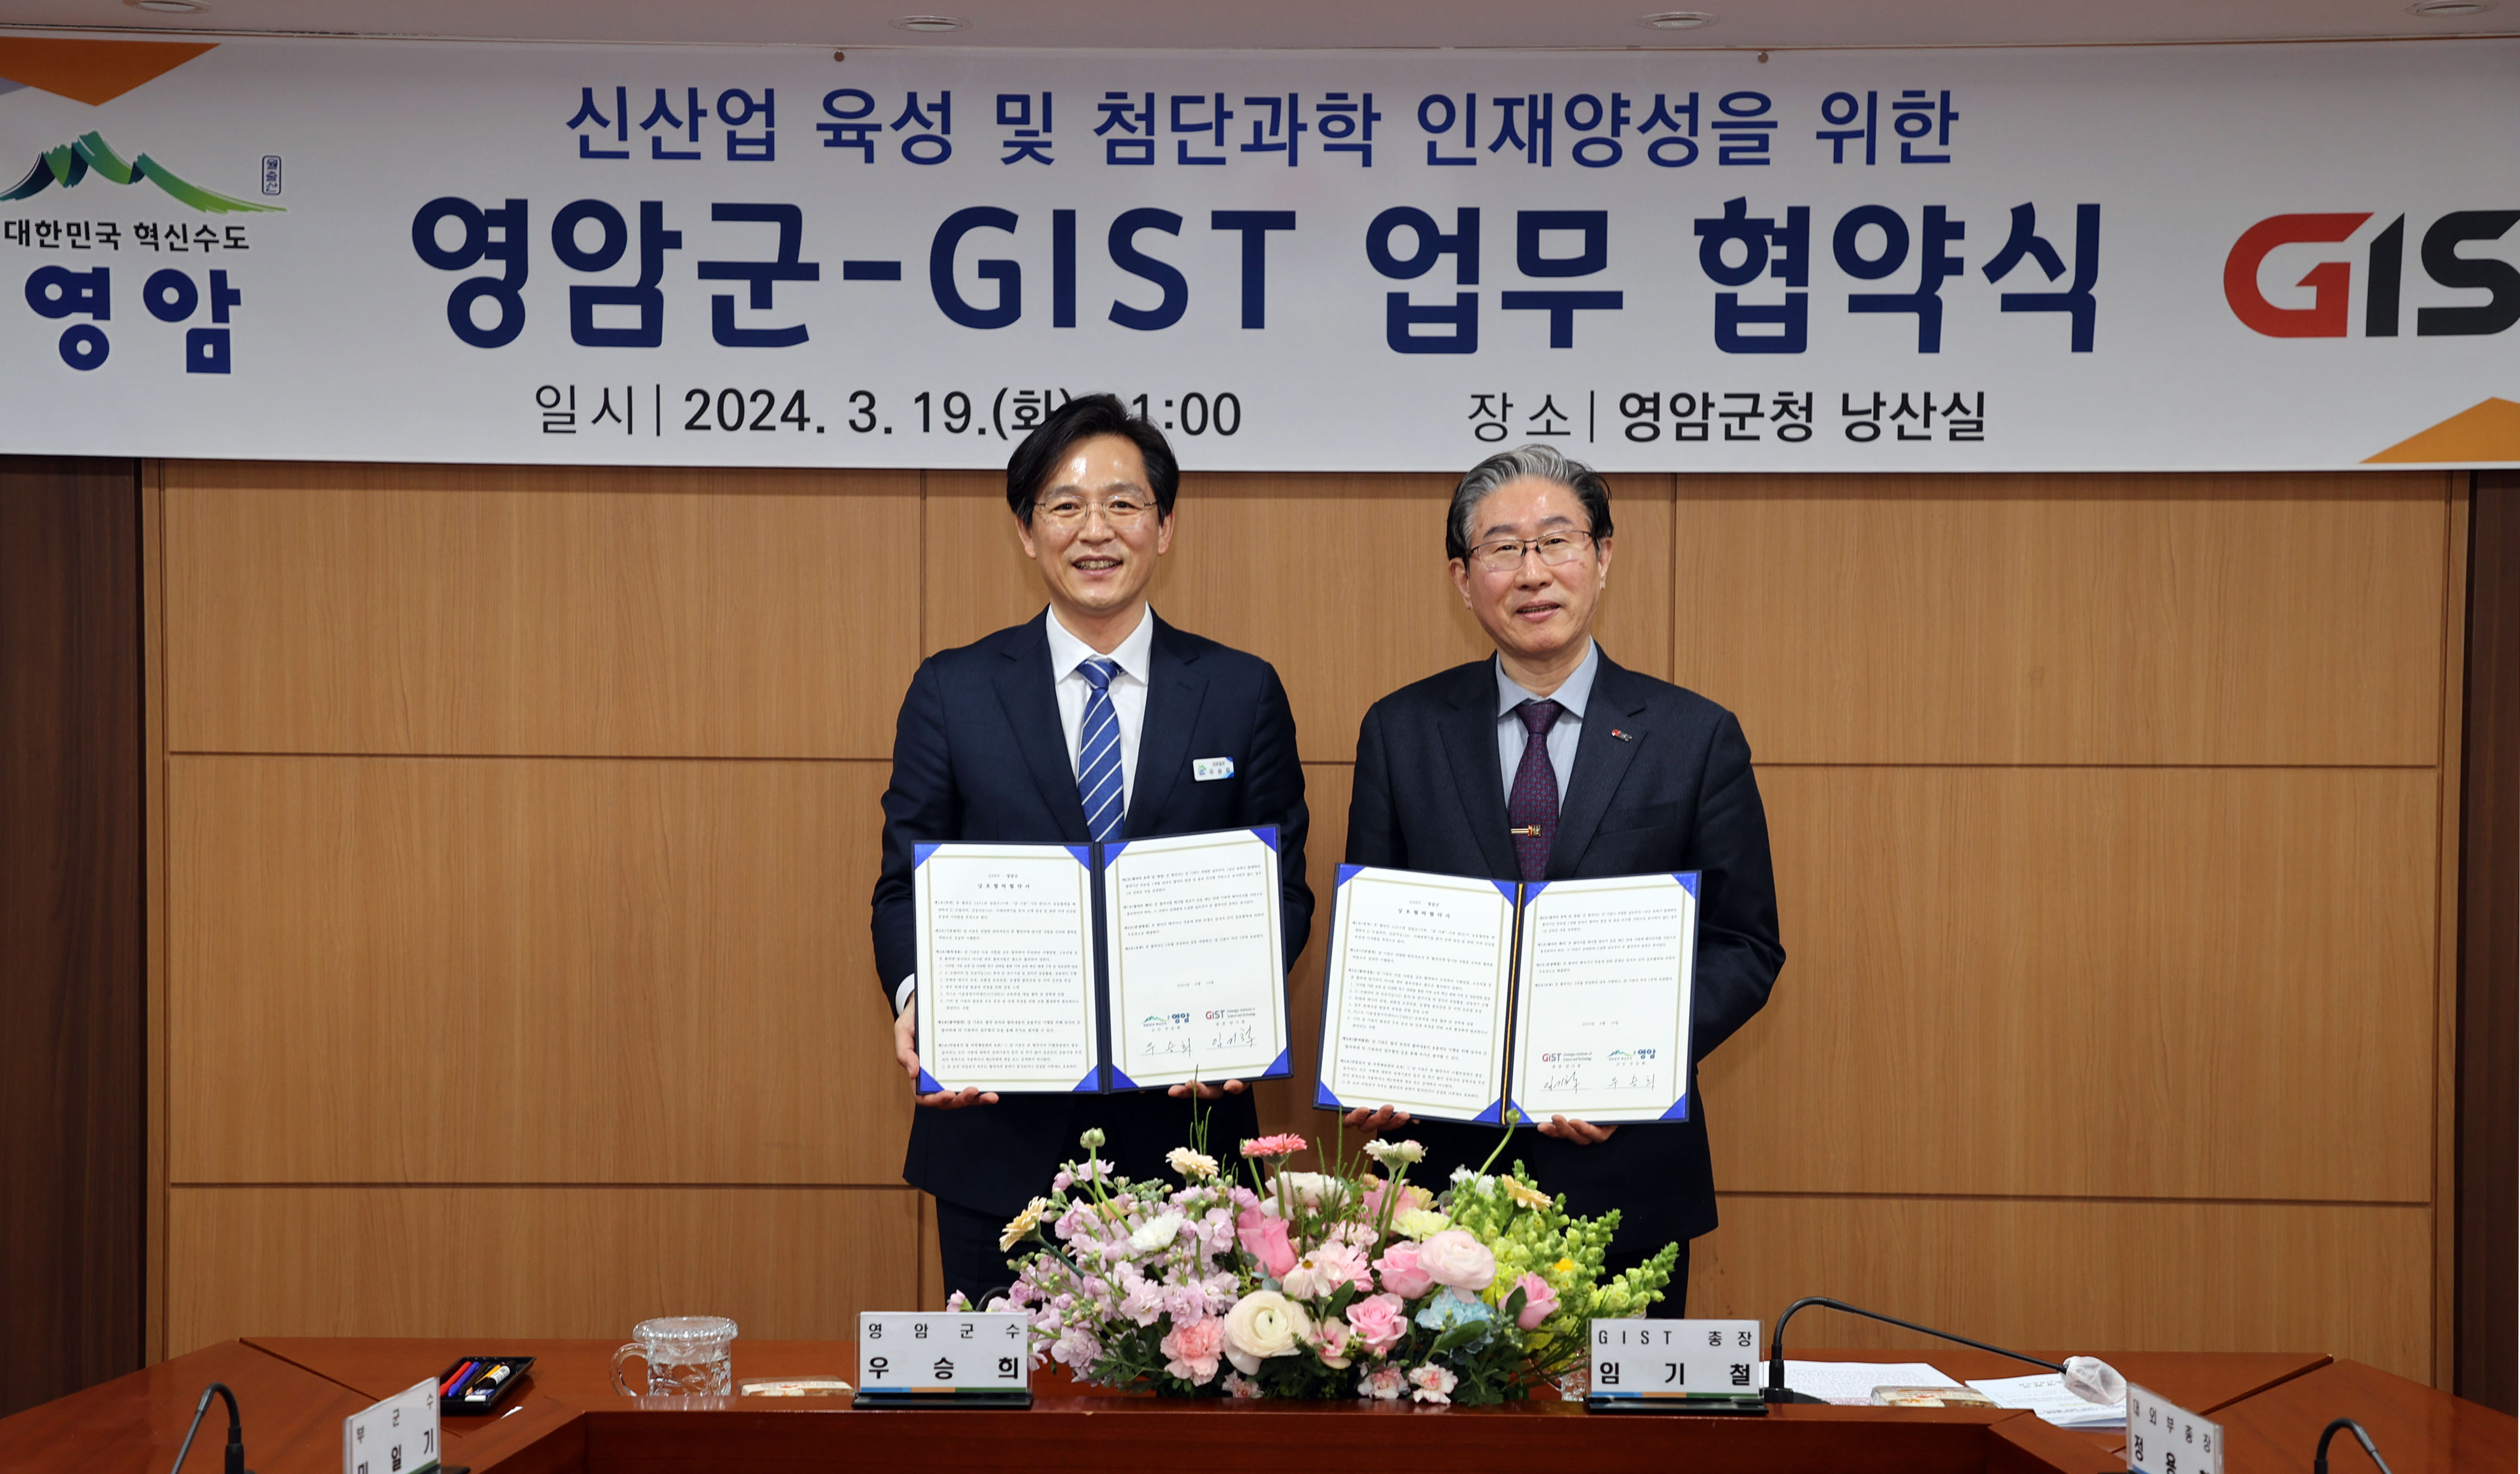 GIST and Yeongam-gun signed an MoU to nurture talent and foster new industries - E-mobility, artificial intelligence (AI), future strategic technology fields - 이미지